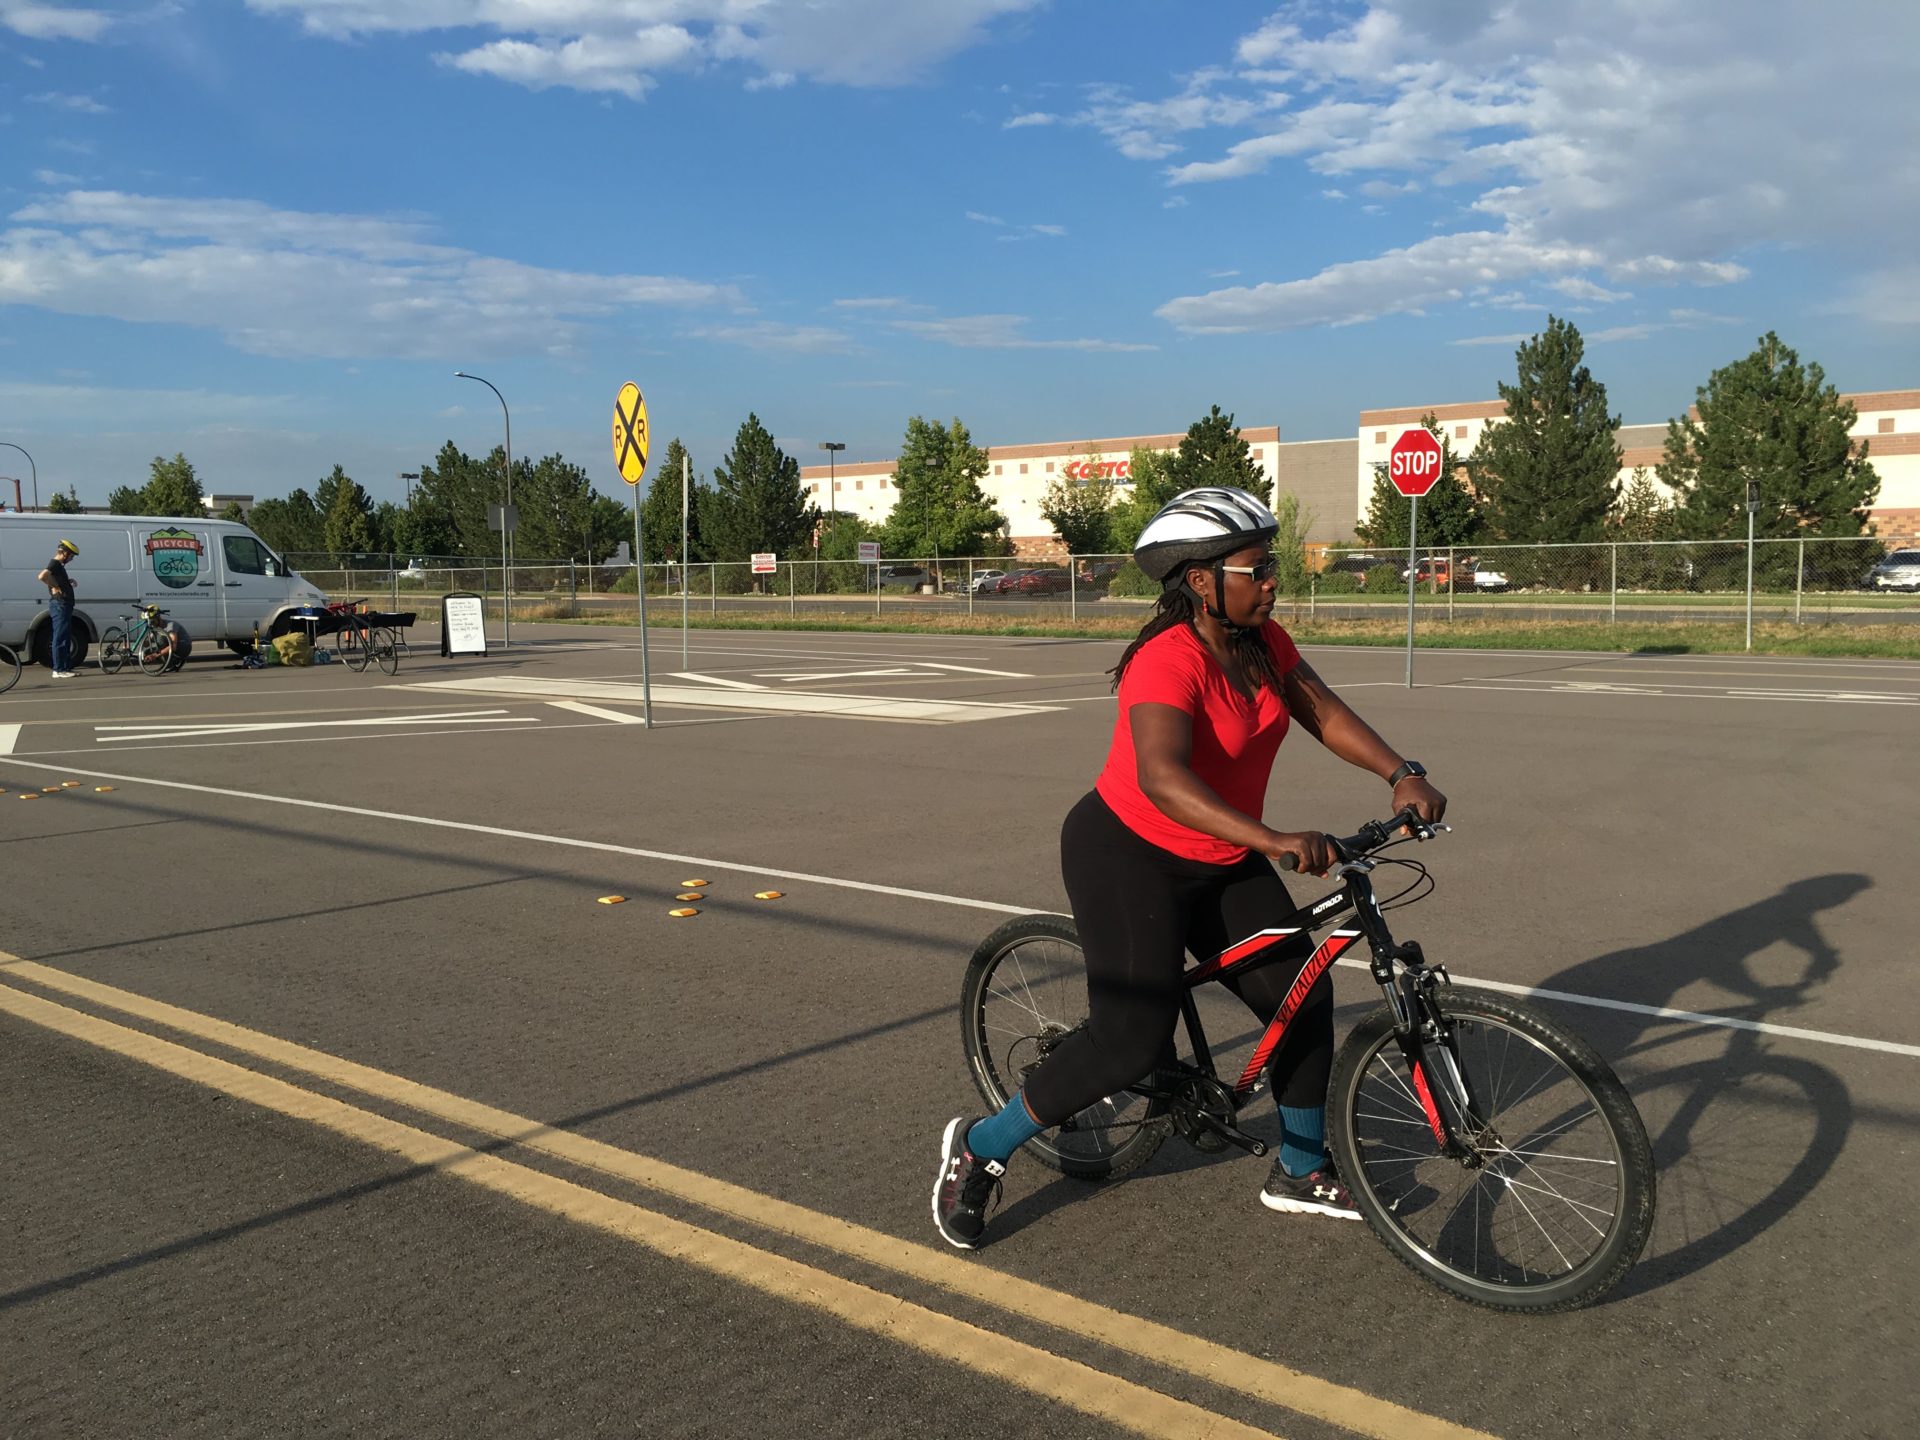 An adult learning to ride a bike in a parking lot and empty street.